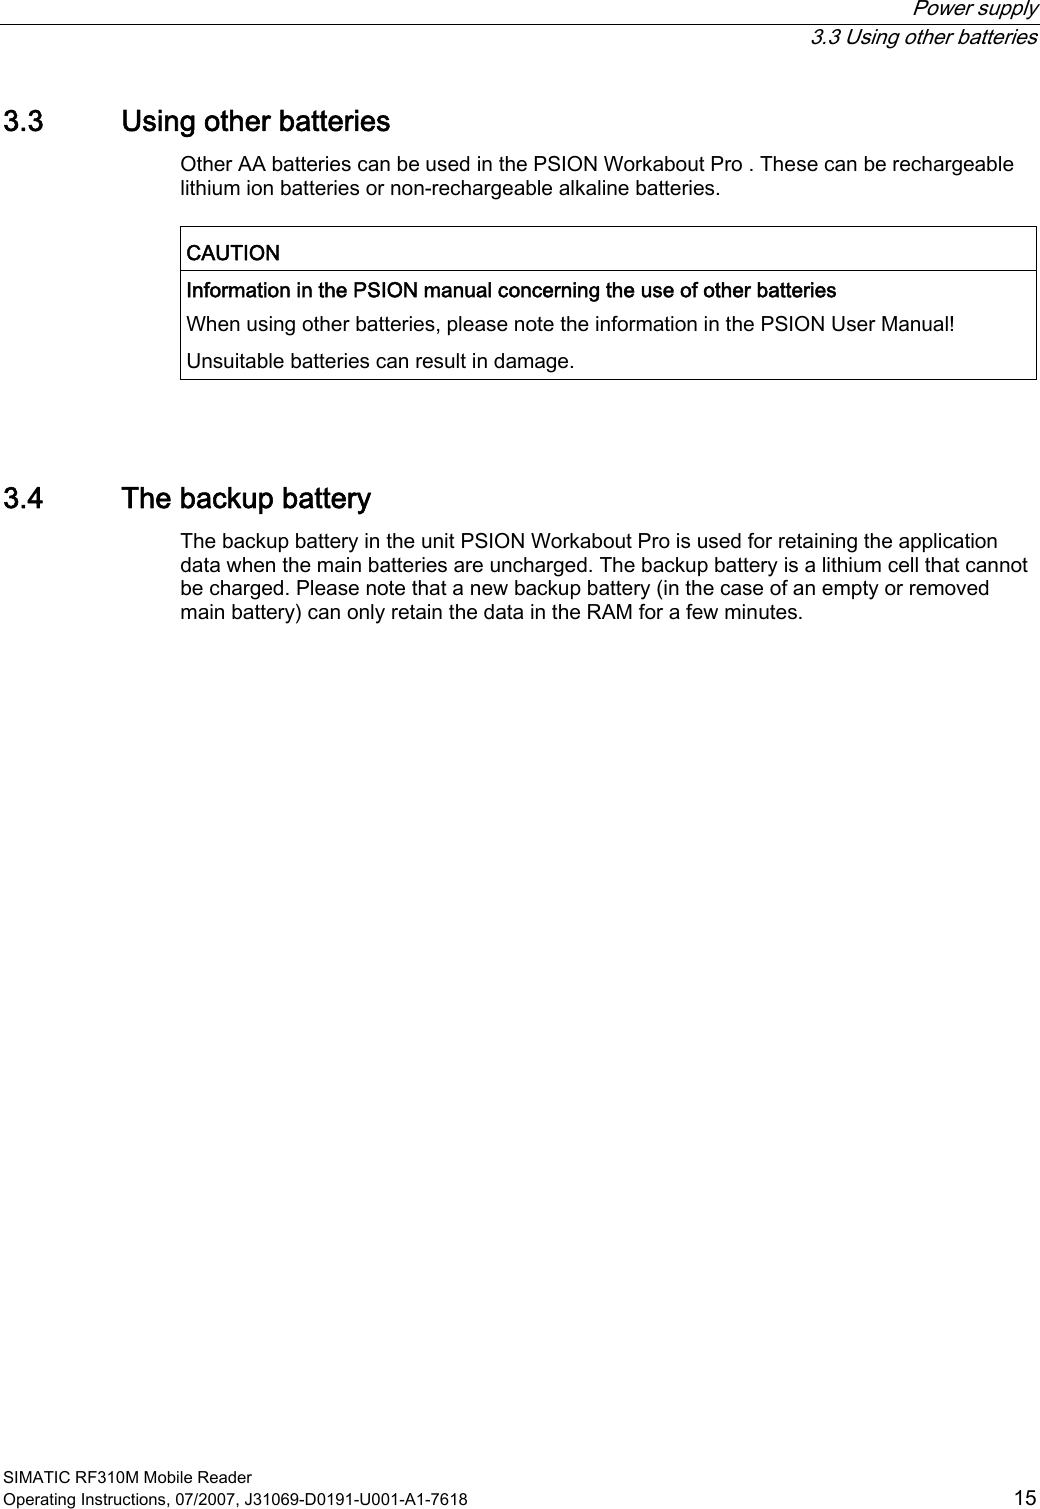  Power supply  3.3 Using other batteries SIMATIC RF310M Mobile Reader Operating Instructions, 07/2007, J31069-D0191-U001-A1-7618  15 3.3 Using other batteries Other AA batteries can be used in the PSION Workabout Pro . These can be rechargeable lithium ion batteries or non-rechargeable alkaline batteries.  CAUTION  Information in the PSION manual concerning the use of other batteries When using other batteries, please note the information in the PSION User Manual! Unsuitable batteries can result in damage.   3.4 The backup battery The backup battery in the unit PSION Workabout Pro is used for retaining the application data when the main batteries are uncharged. The backup battery is a lithium cell that cannot be charged. Please note that a new backup battery (in the case of an empty or removed main battery) can only retain the data in the RAM for a few minutes. 